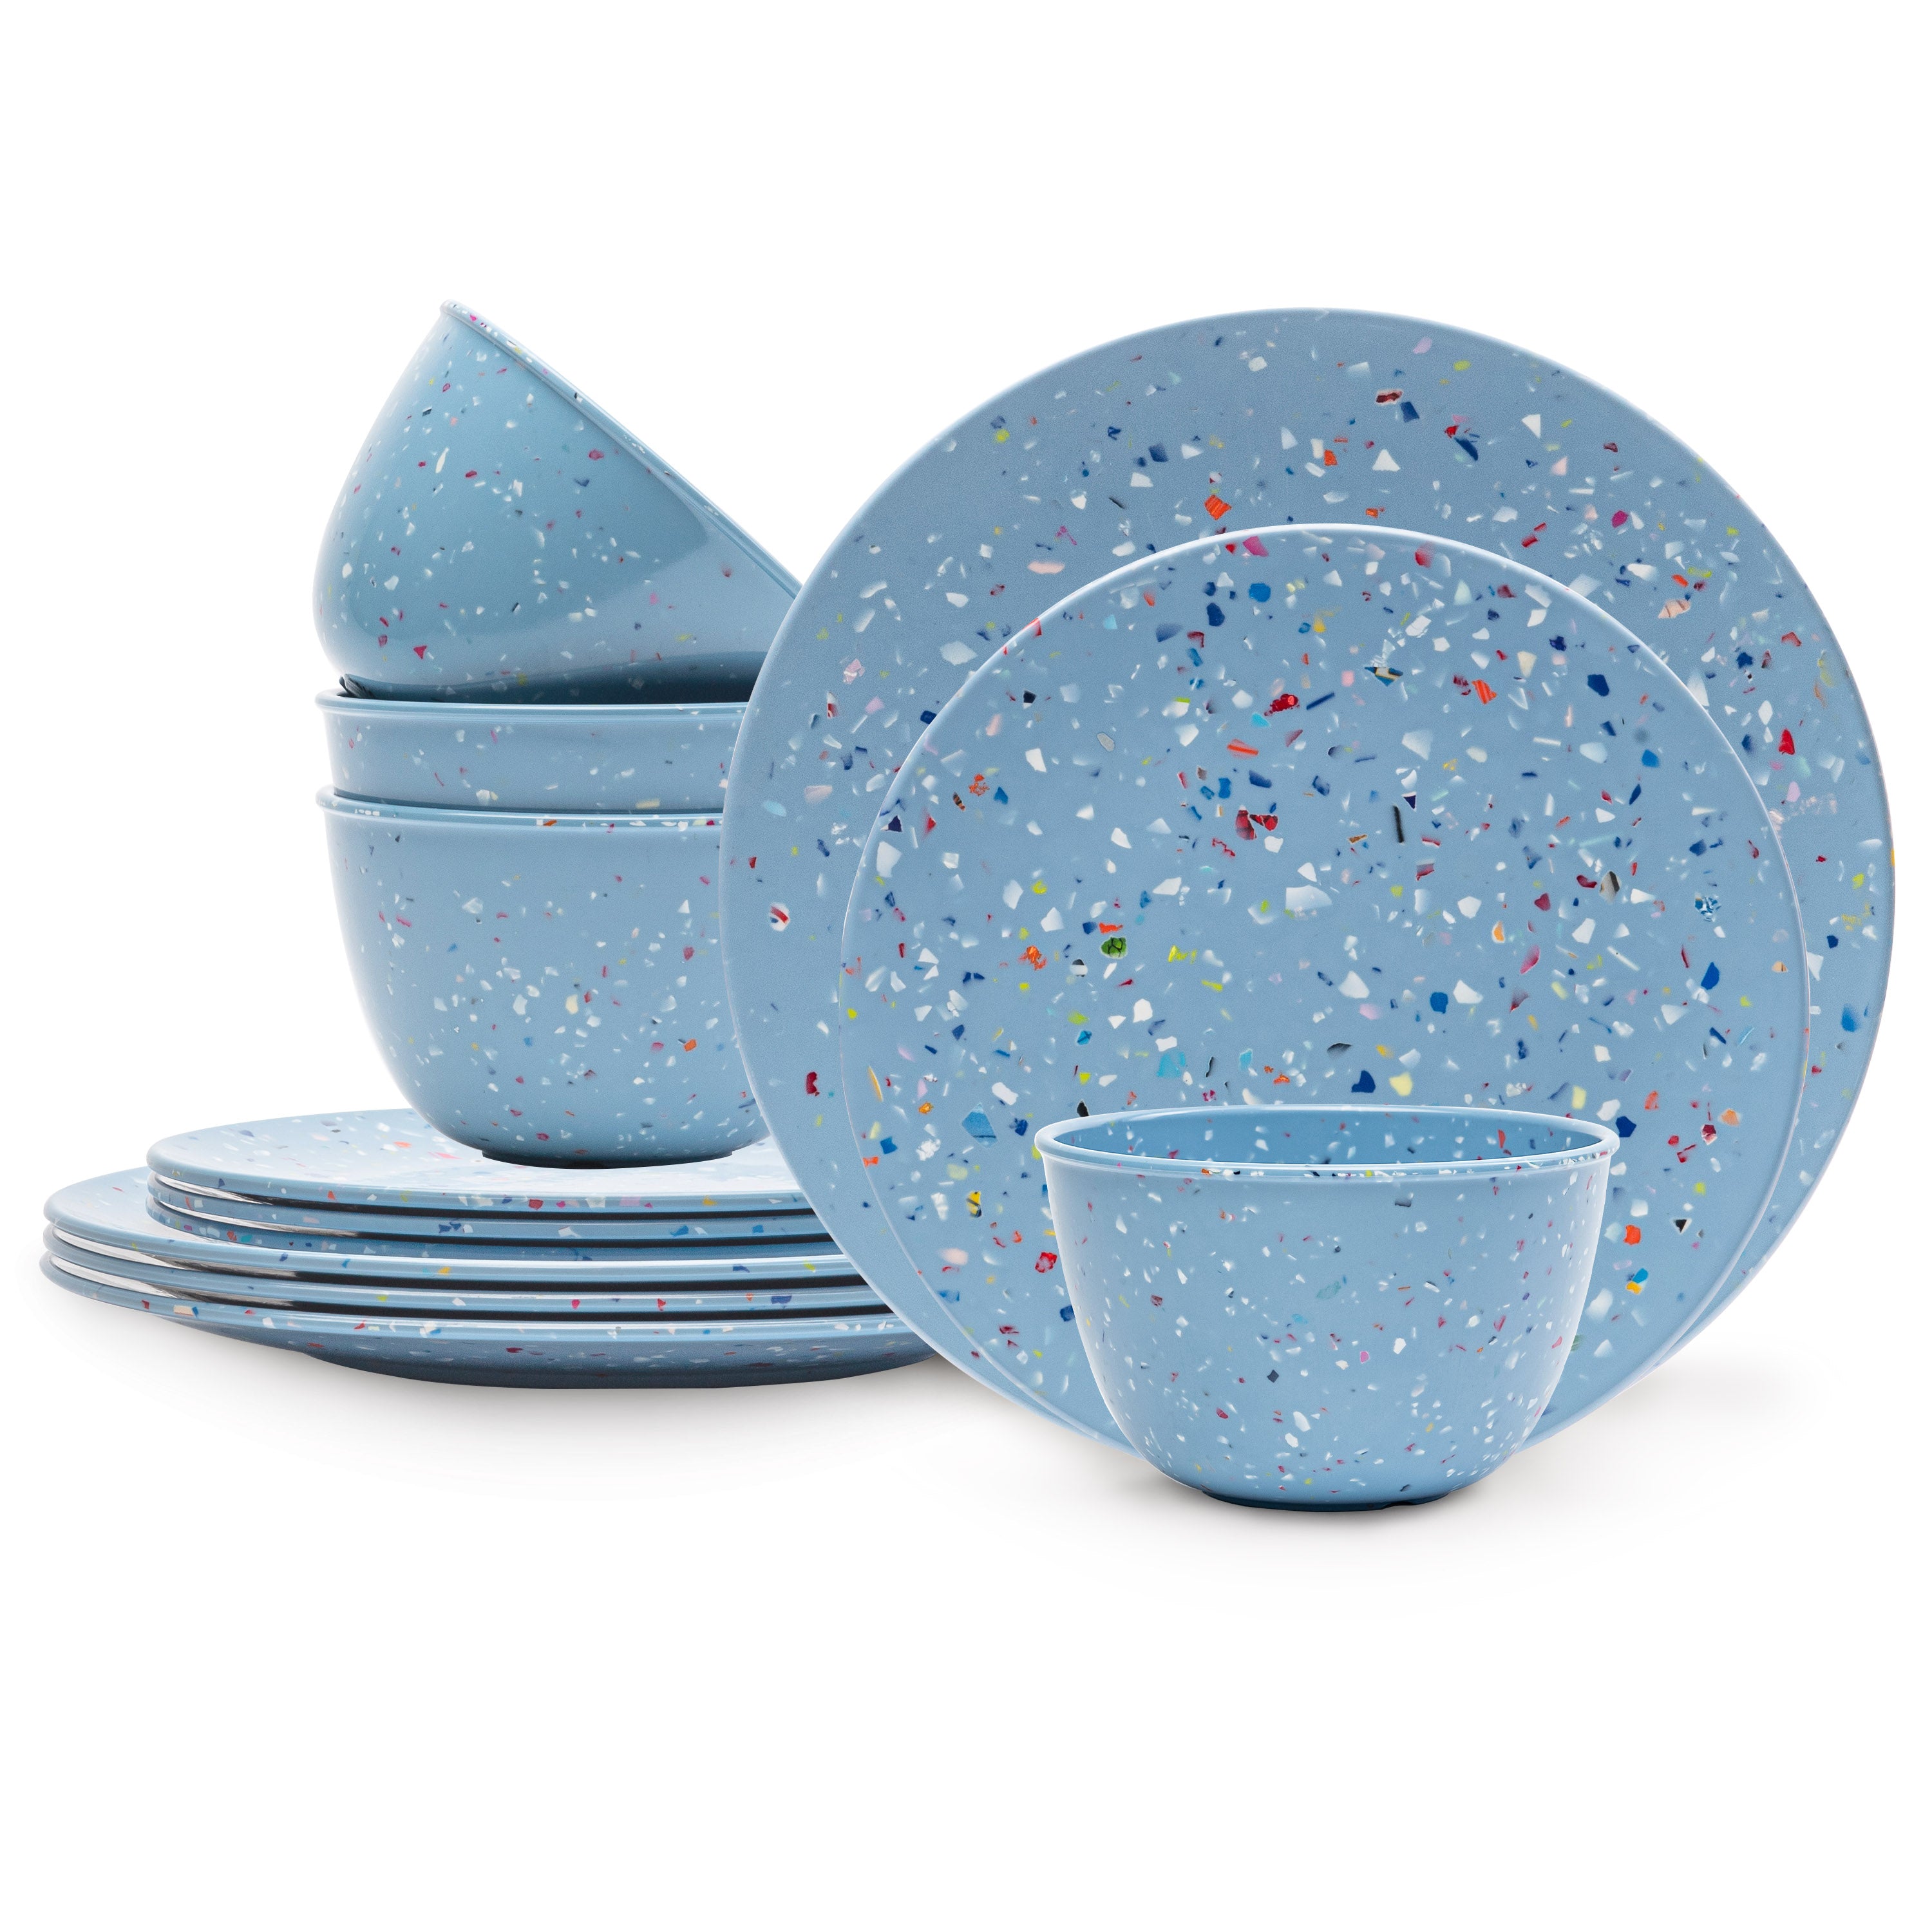 Confetti Melamine Dinnerware Set - Durable, Recycled Plates and Bowls, Blue